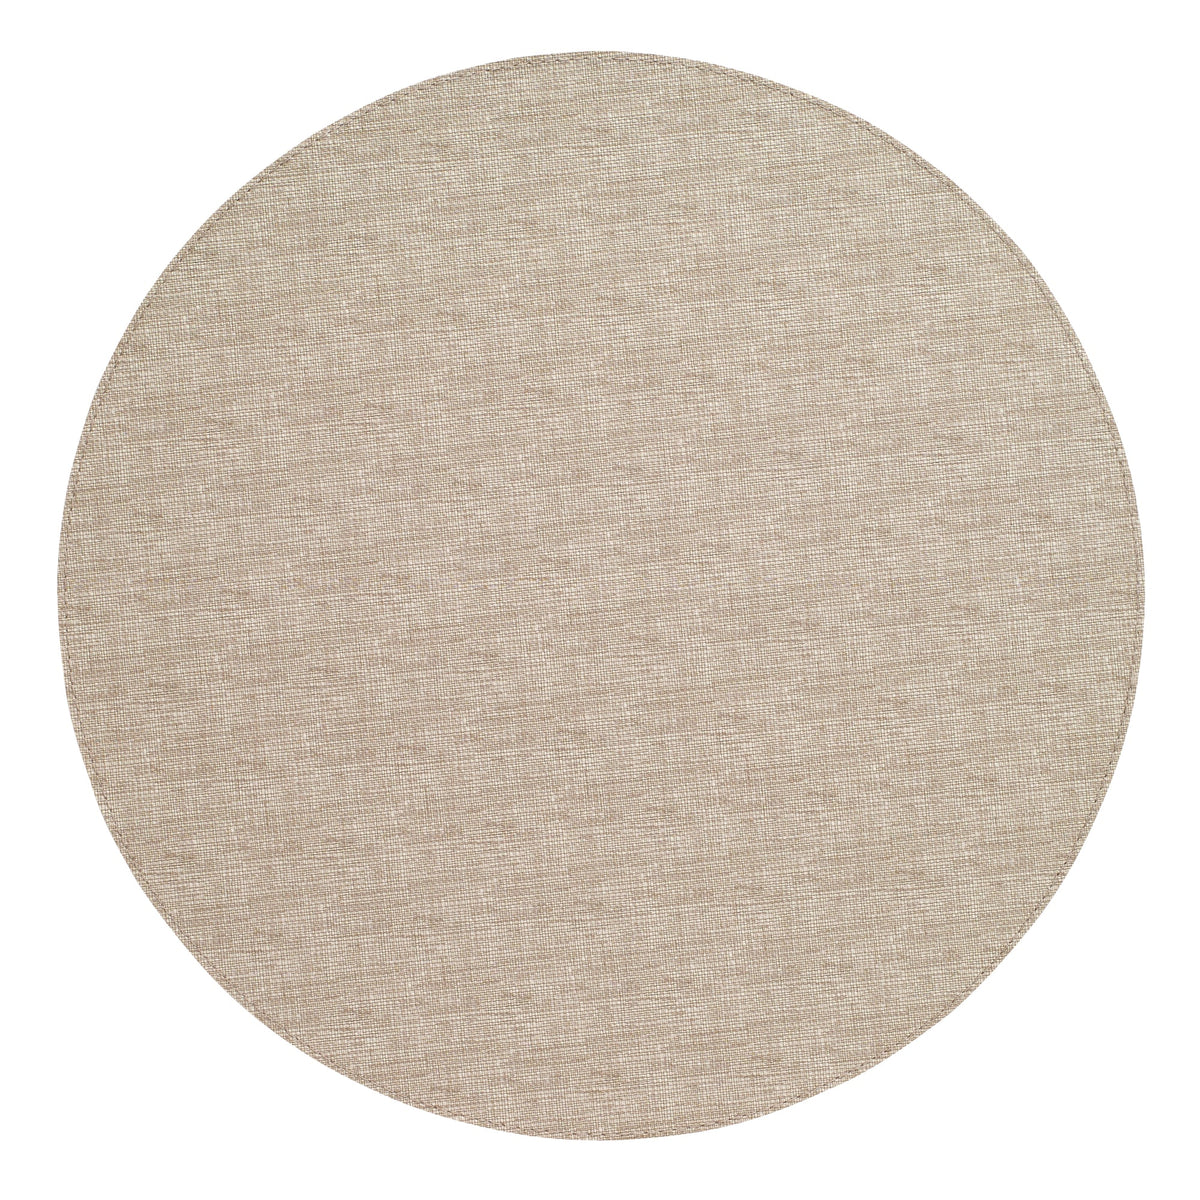 Pronto Round Placemat, Set of 4